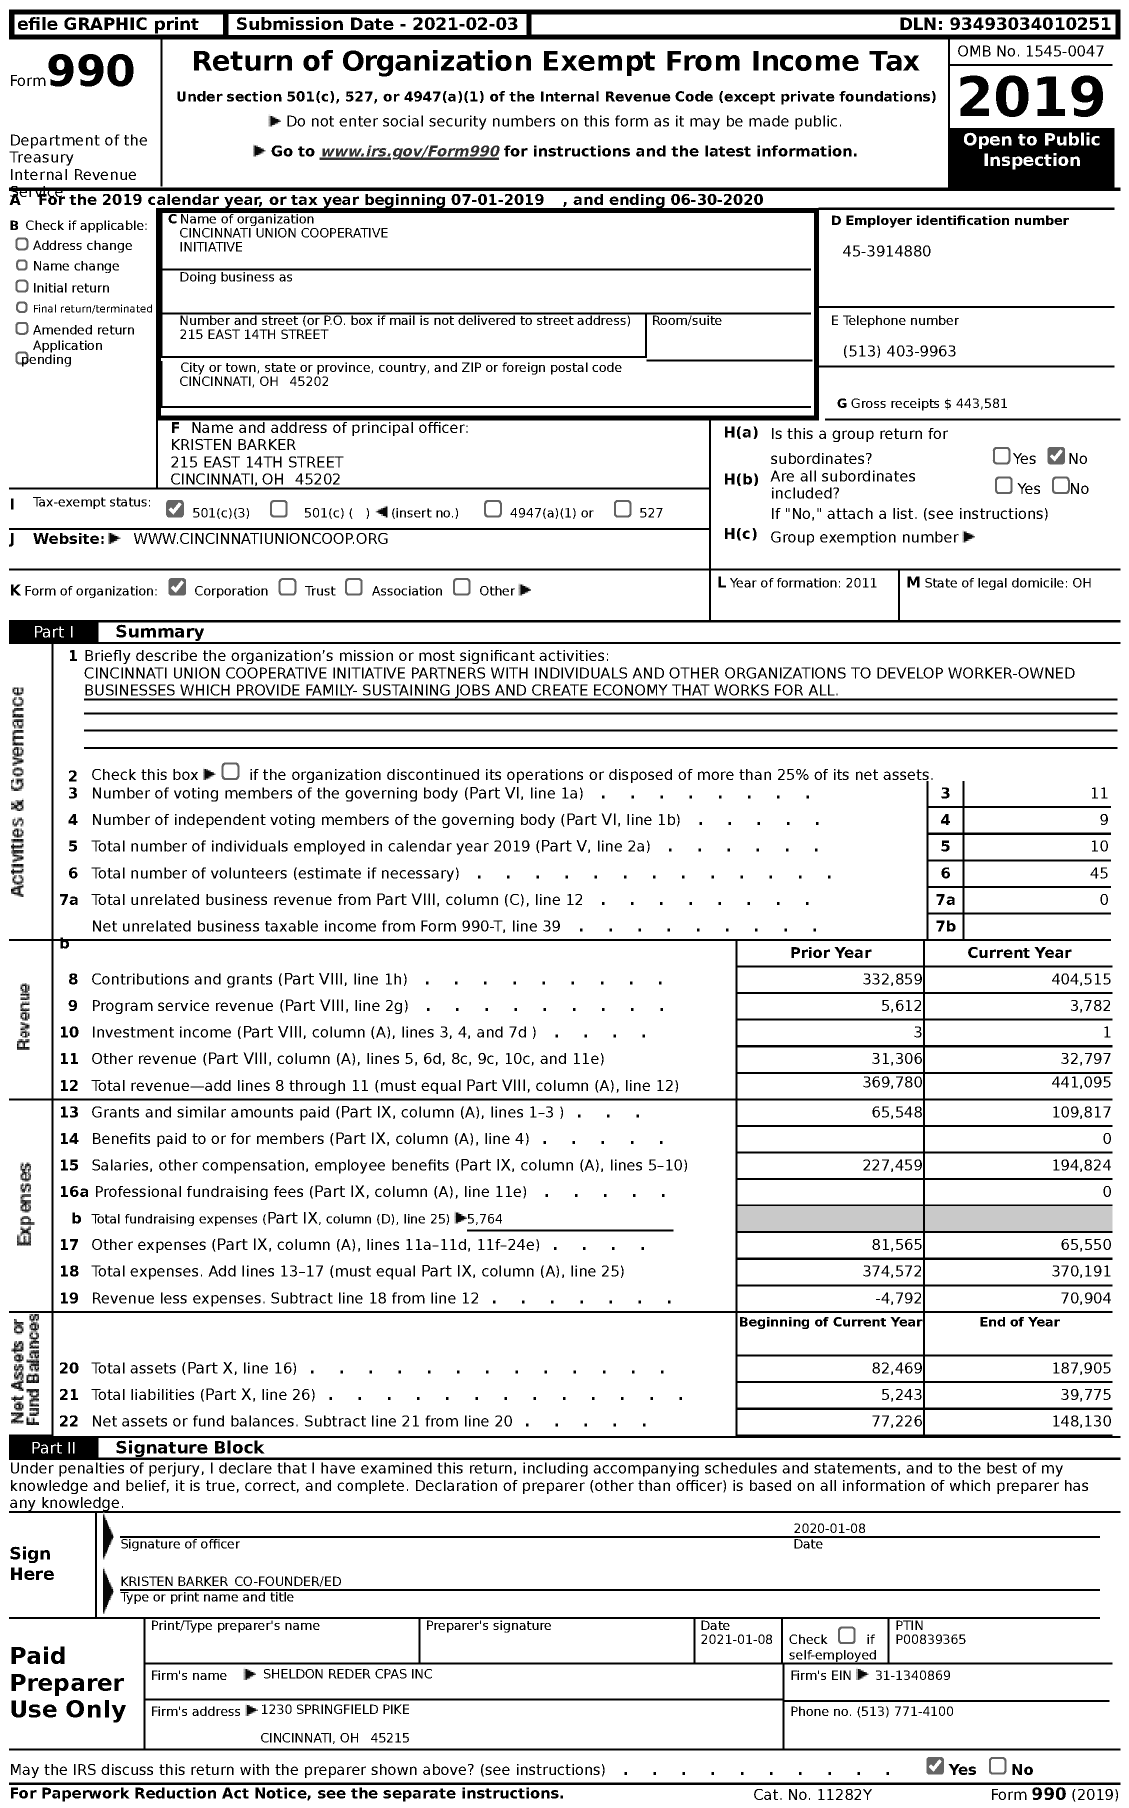 Image of first page of 2019 Form 990 for Cincinnati Union Cooperative Initiative